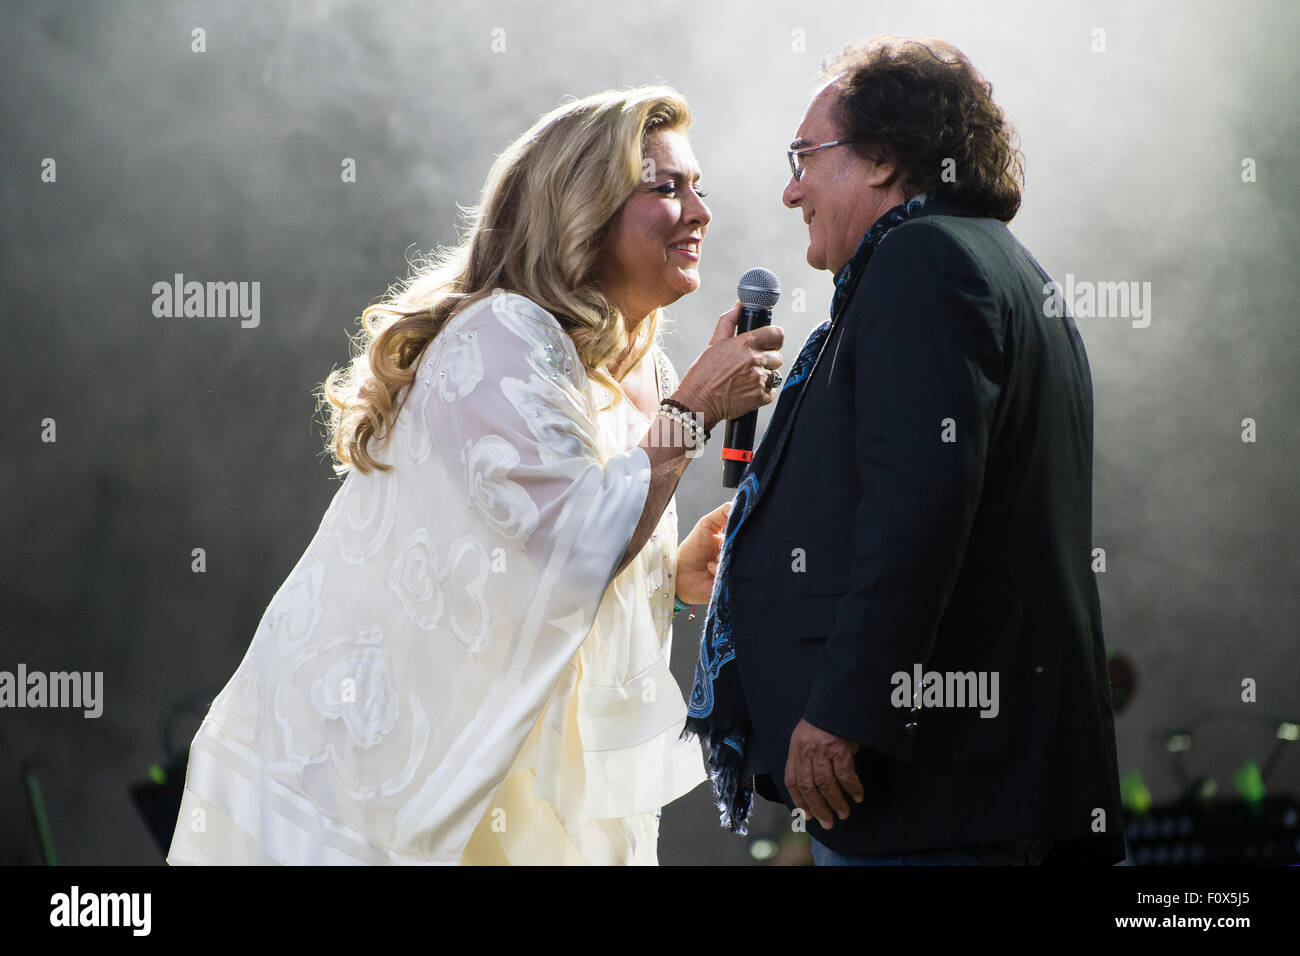 Berlin, Germany. 21st Aug, 2015. Singing duo Romina Power and Albano Carrisi (Al Bano) perform on stage during a concert in Berlin, Germany, 21 August 2015. The concert is their first in the German-speaking region in 20 years. Photo: Gregor Fischer/dpa/Alamy Live News Stock Photo